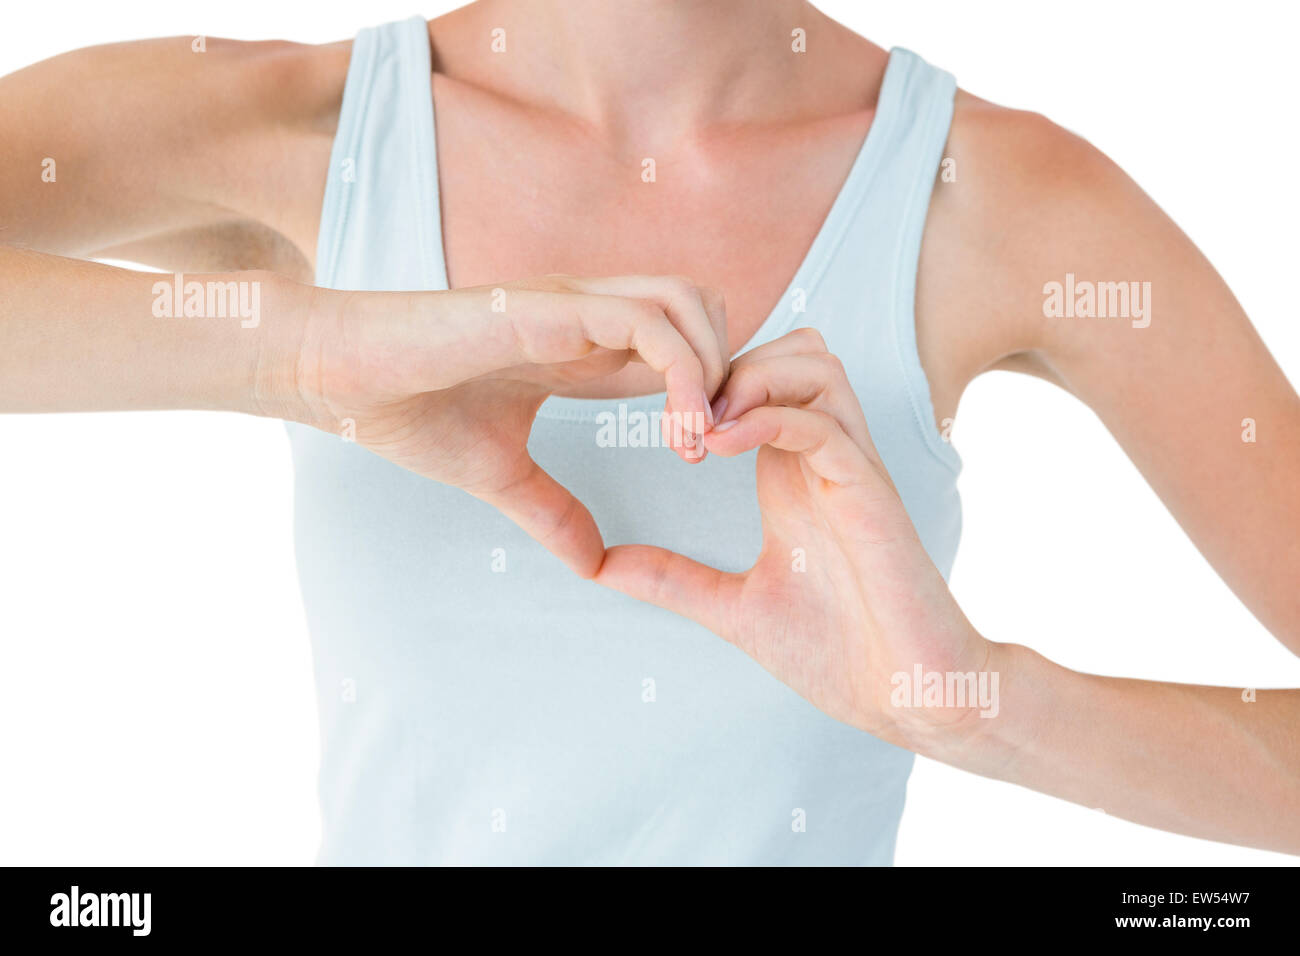 Fit woman doing heart shape with her hands Stock Photo